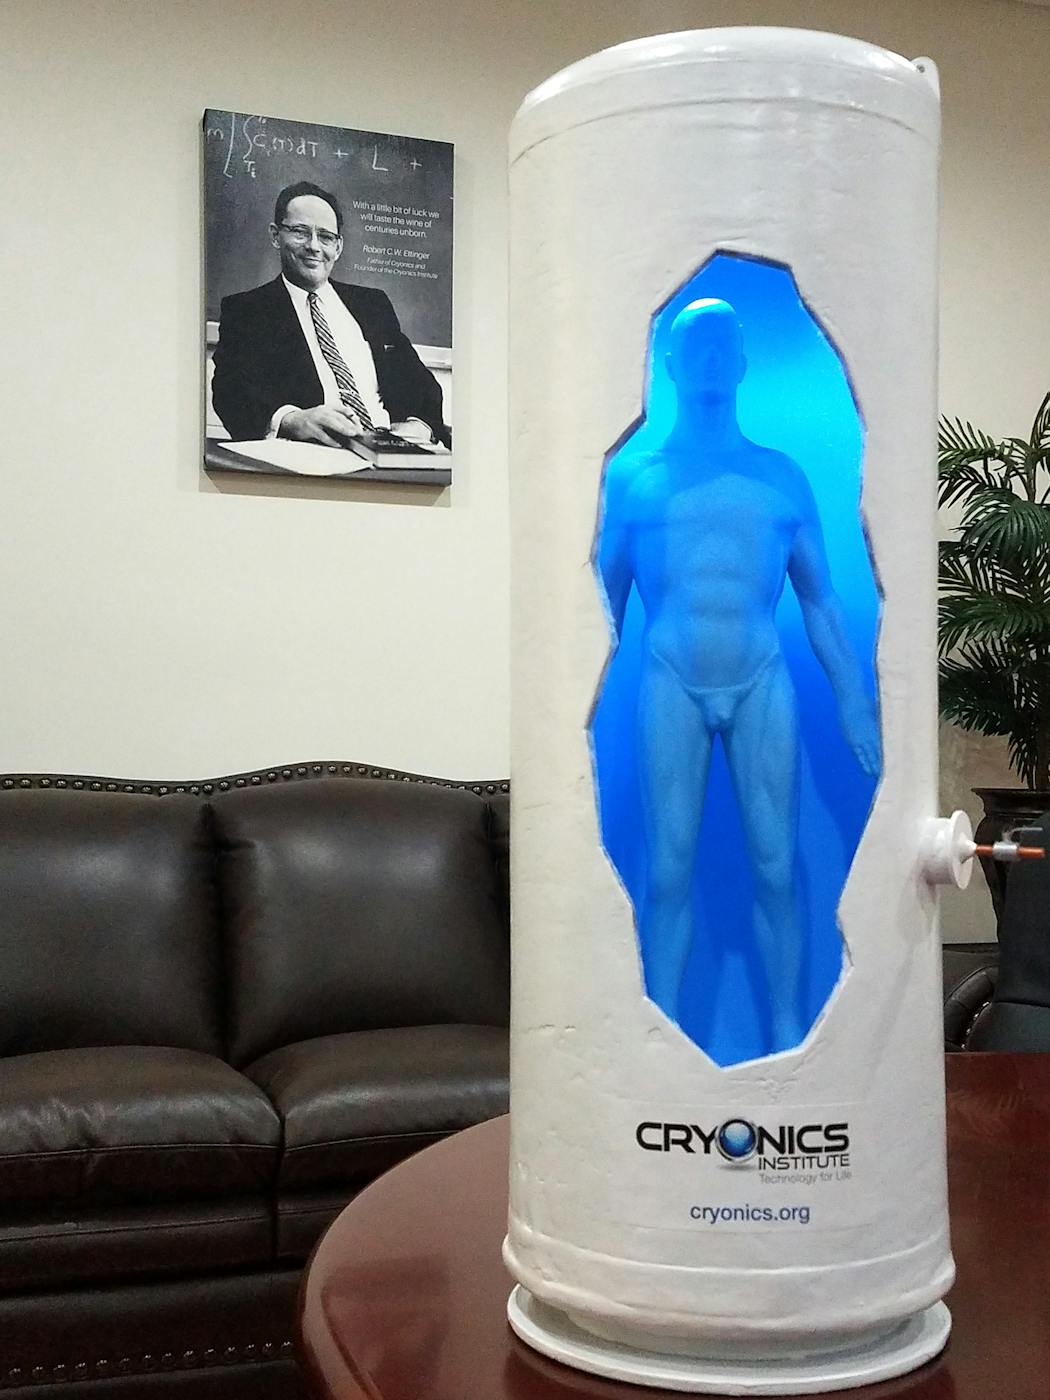 A model at the Cryonics Institute illustrates the inside of a cryostat. The photo in the background is of Robert Ettinger, founder of the Cryonics Institute, whose body is stored at the facility.